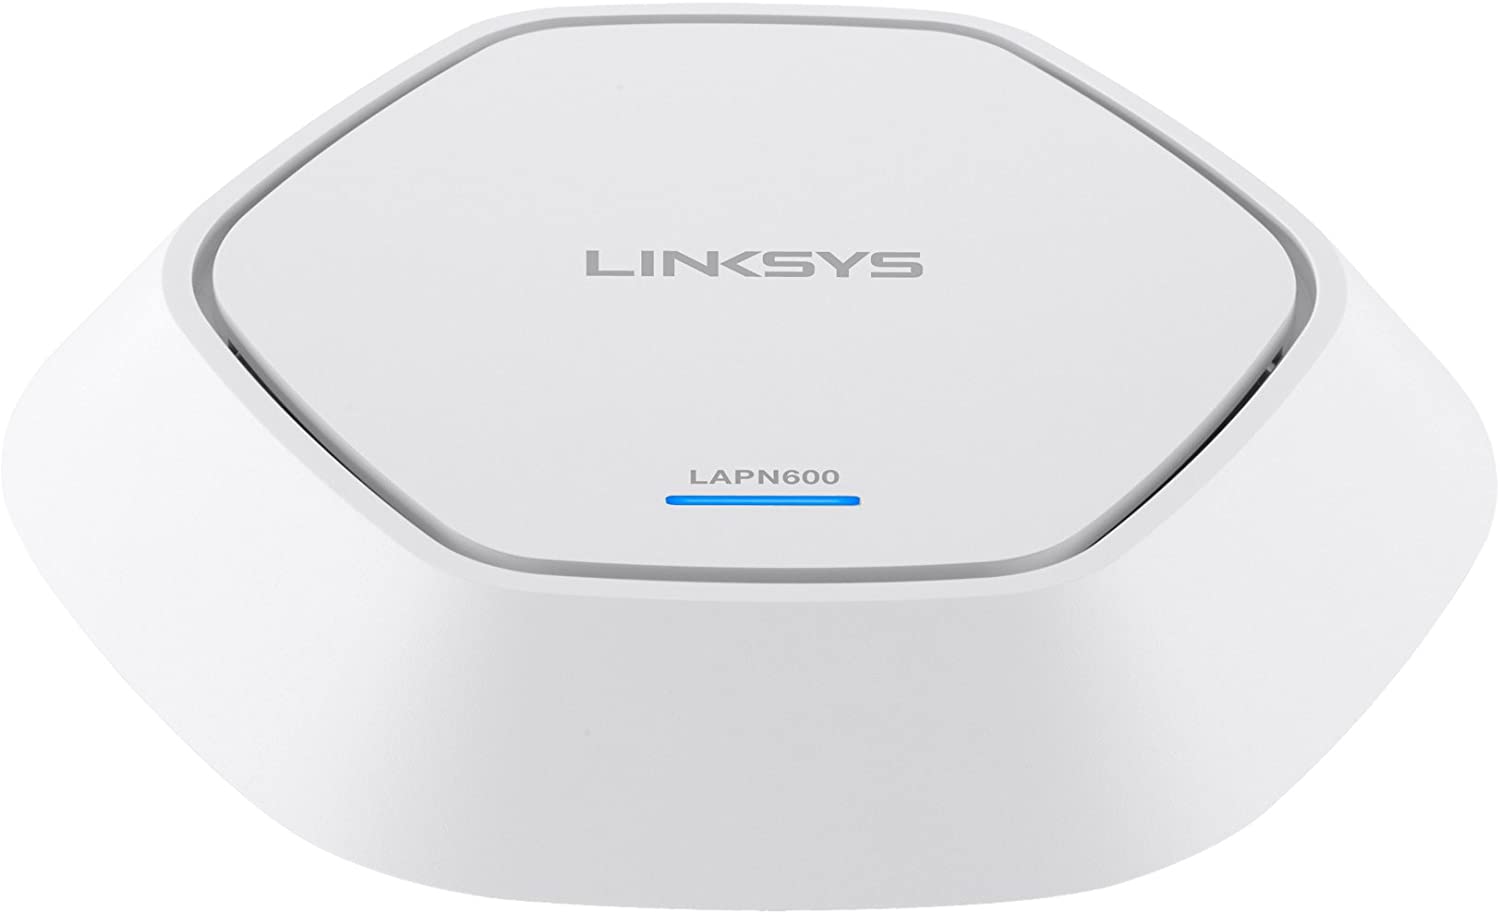 Linksys LAPN-600-EU N600 Access Point 600 Mbit/s PoE MIMO 2x2 Dual Band weiss